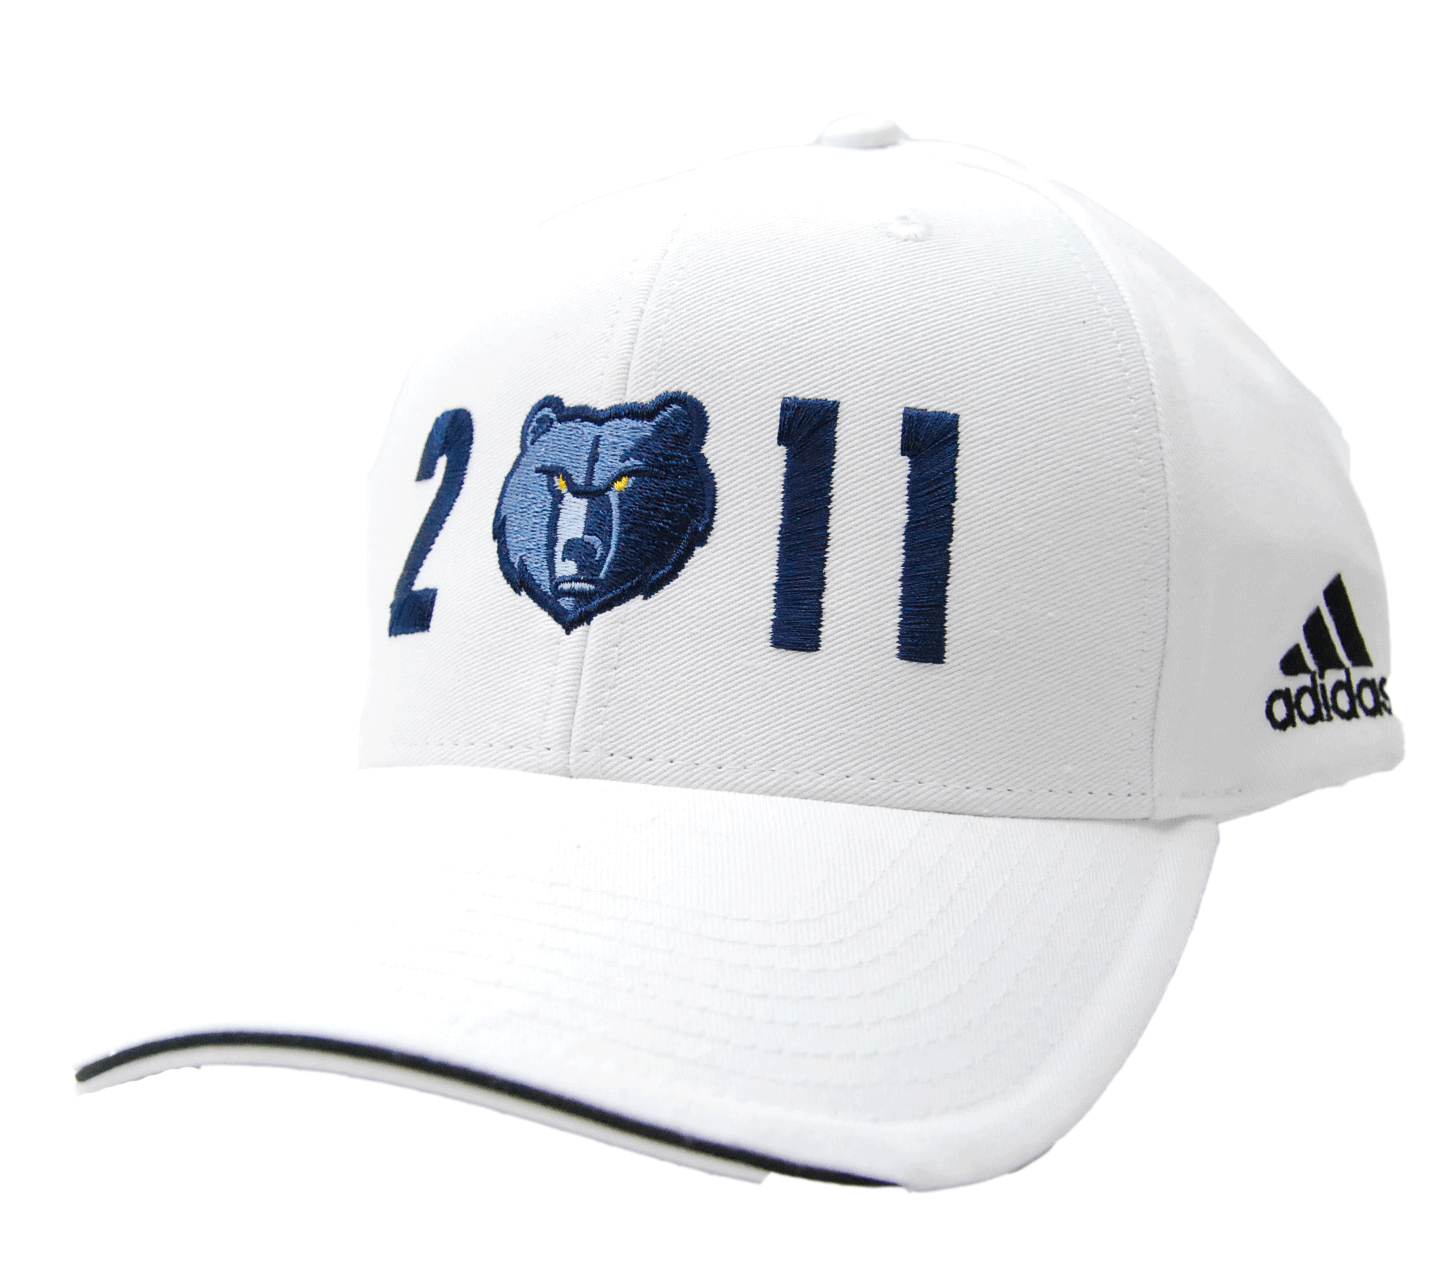 Primary image for Memphis Grizzlies adidas White NBA Playoffs Adjustable Basketball Cap Hat